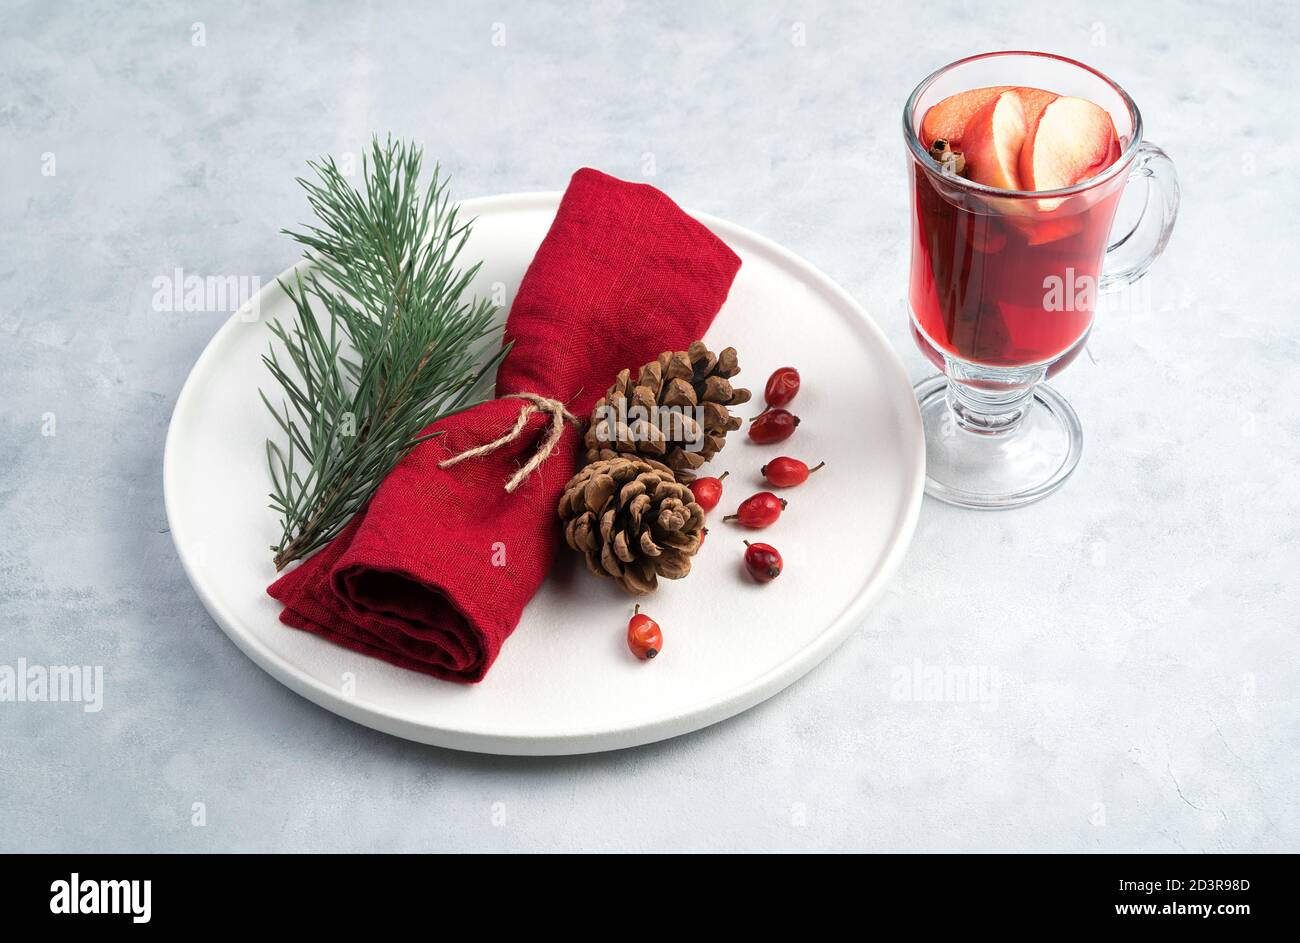 Christmas composition with a glass of mulled wine and a beautifully decorated plate with spruce branches and a red napkin. Stock Photo